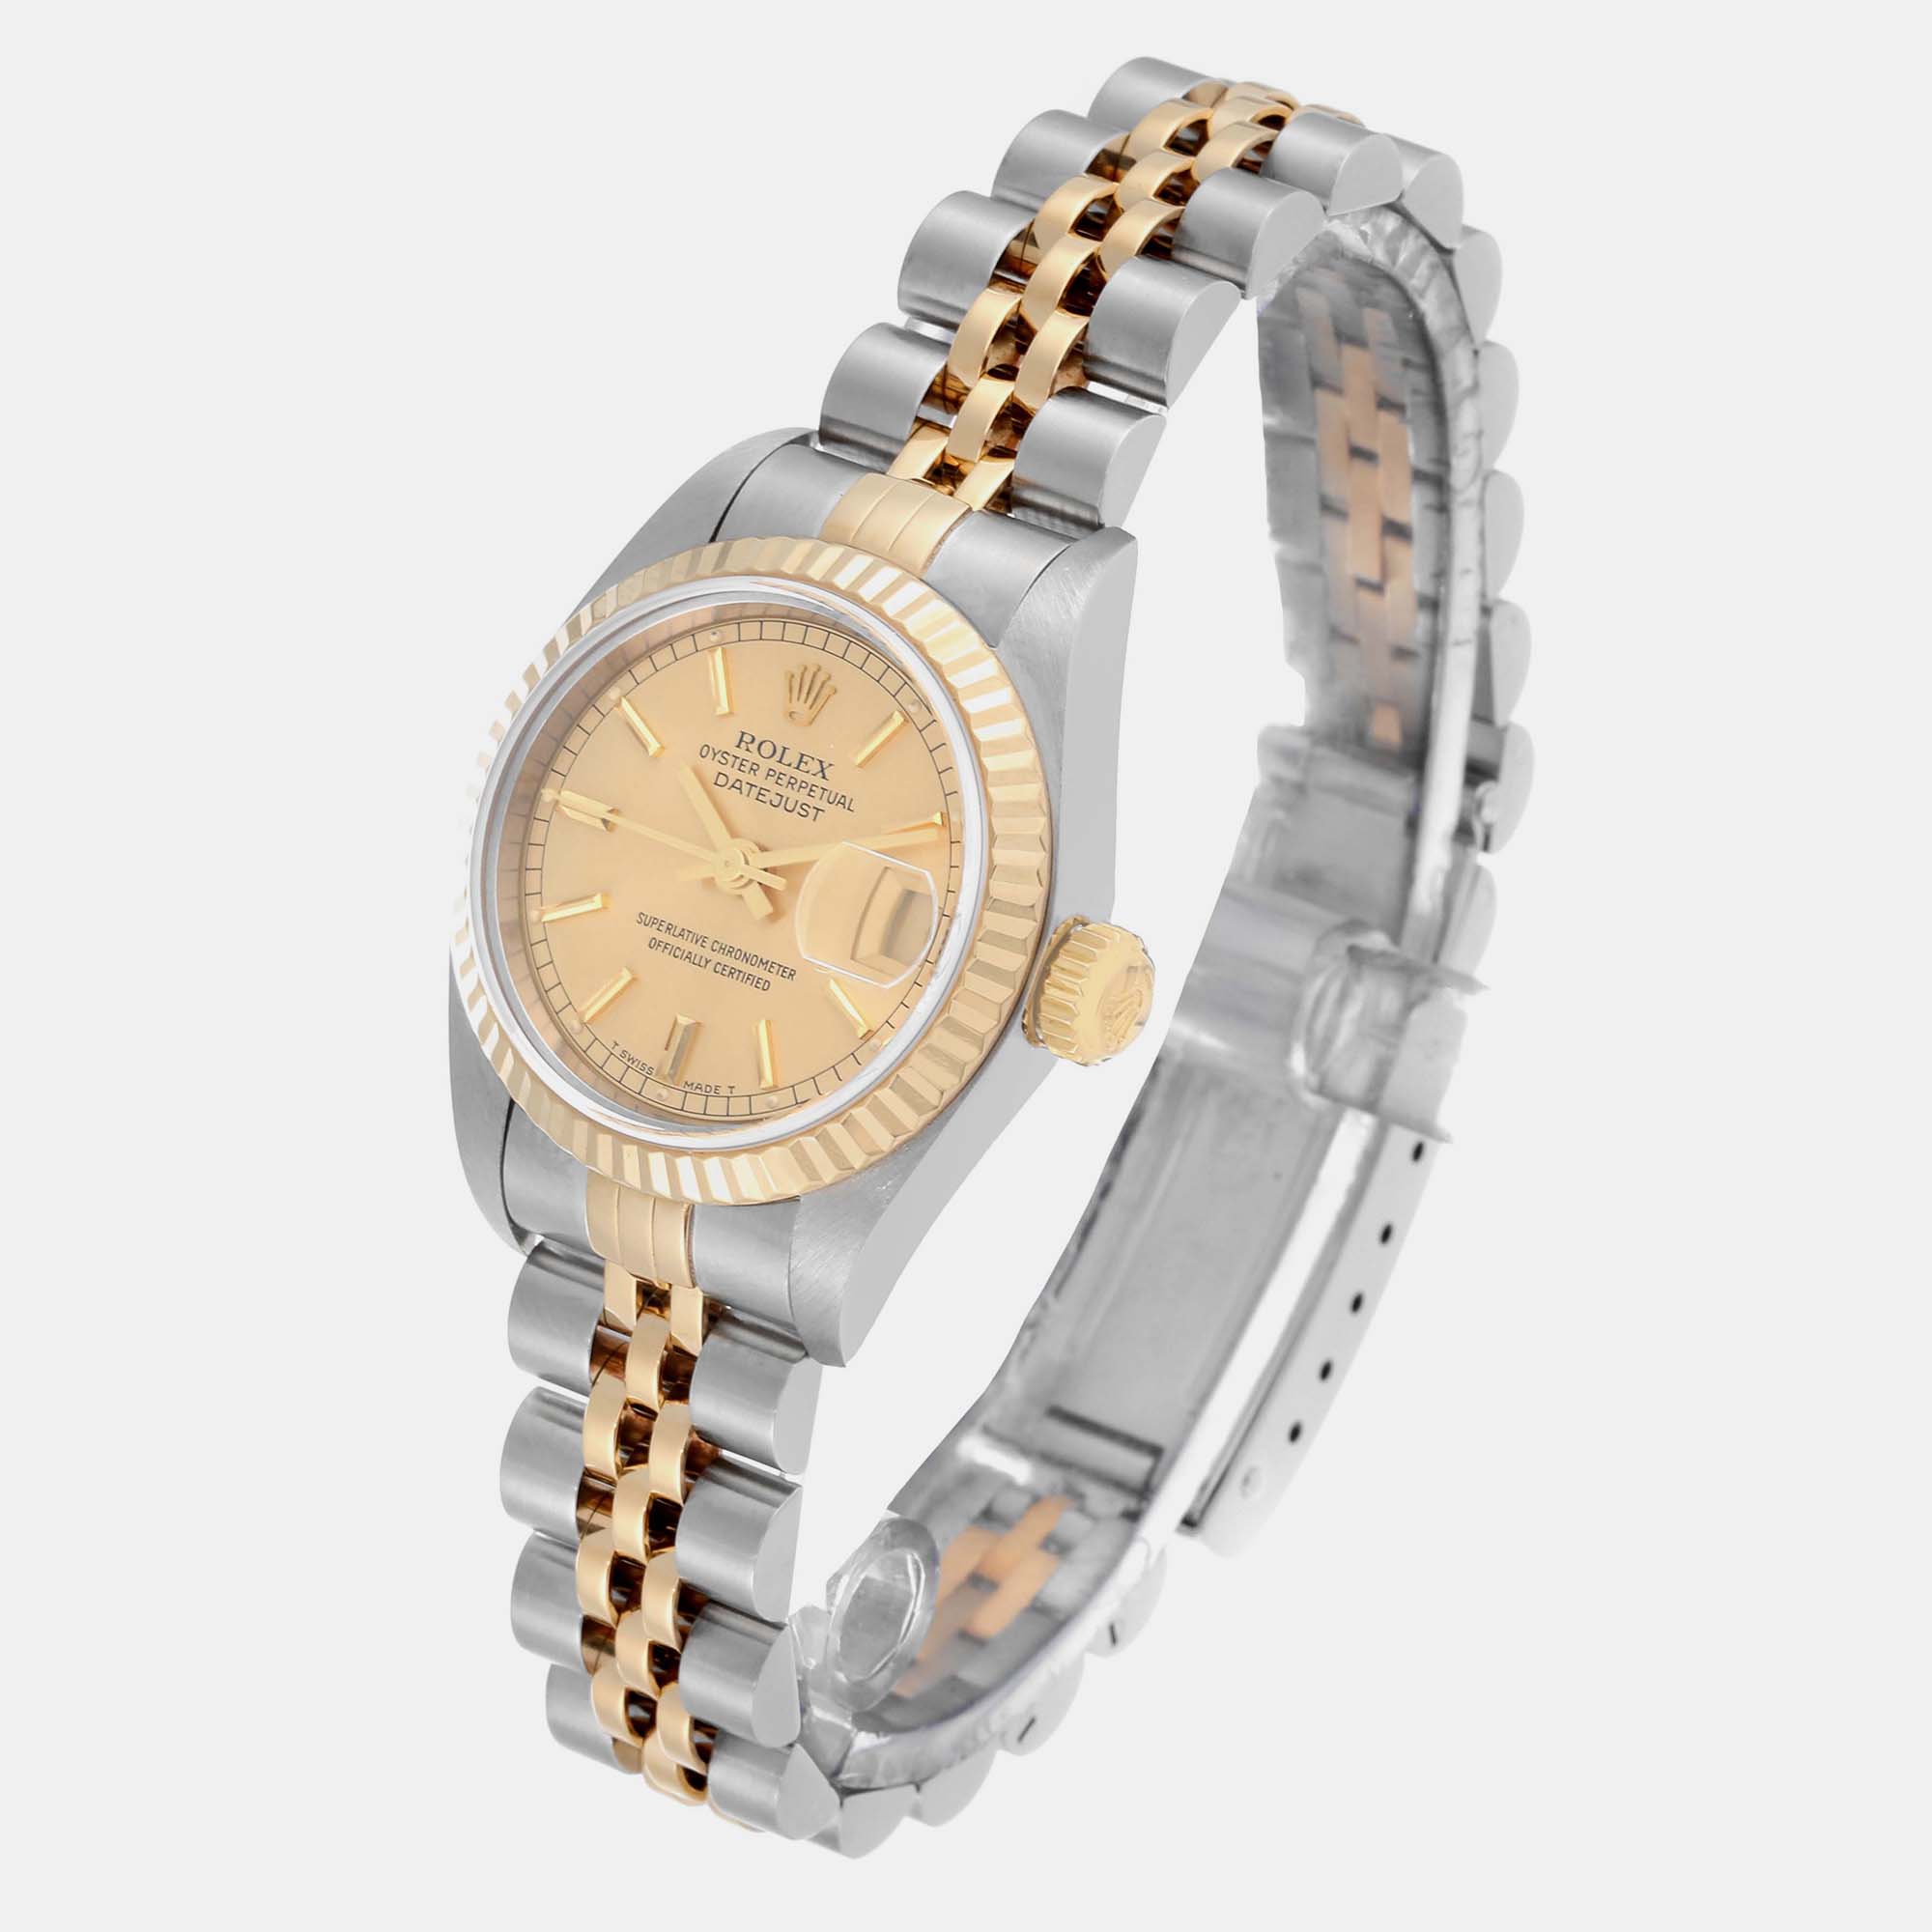 Rolex Datejust Steel Yellow Gold Champagne Dial Ladies Watch 79173 26 Mm